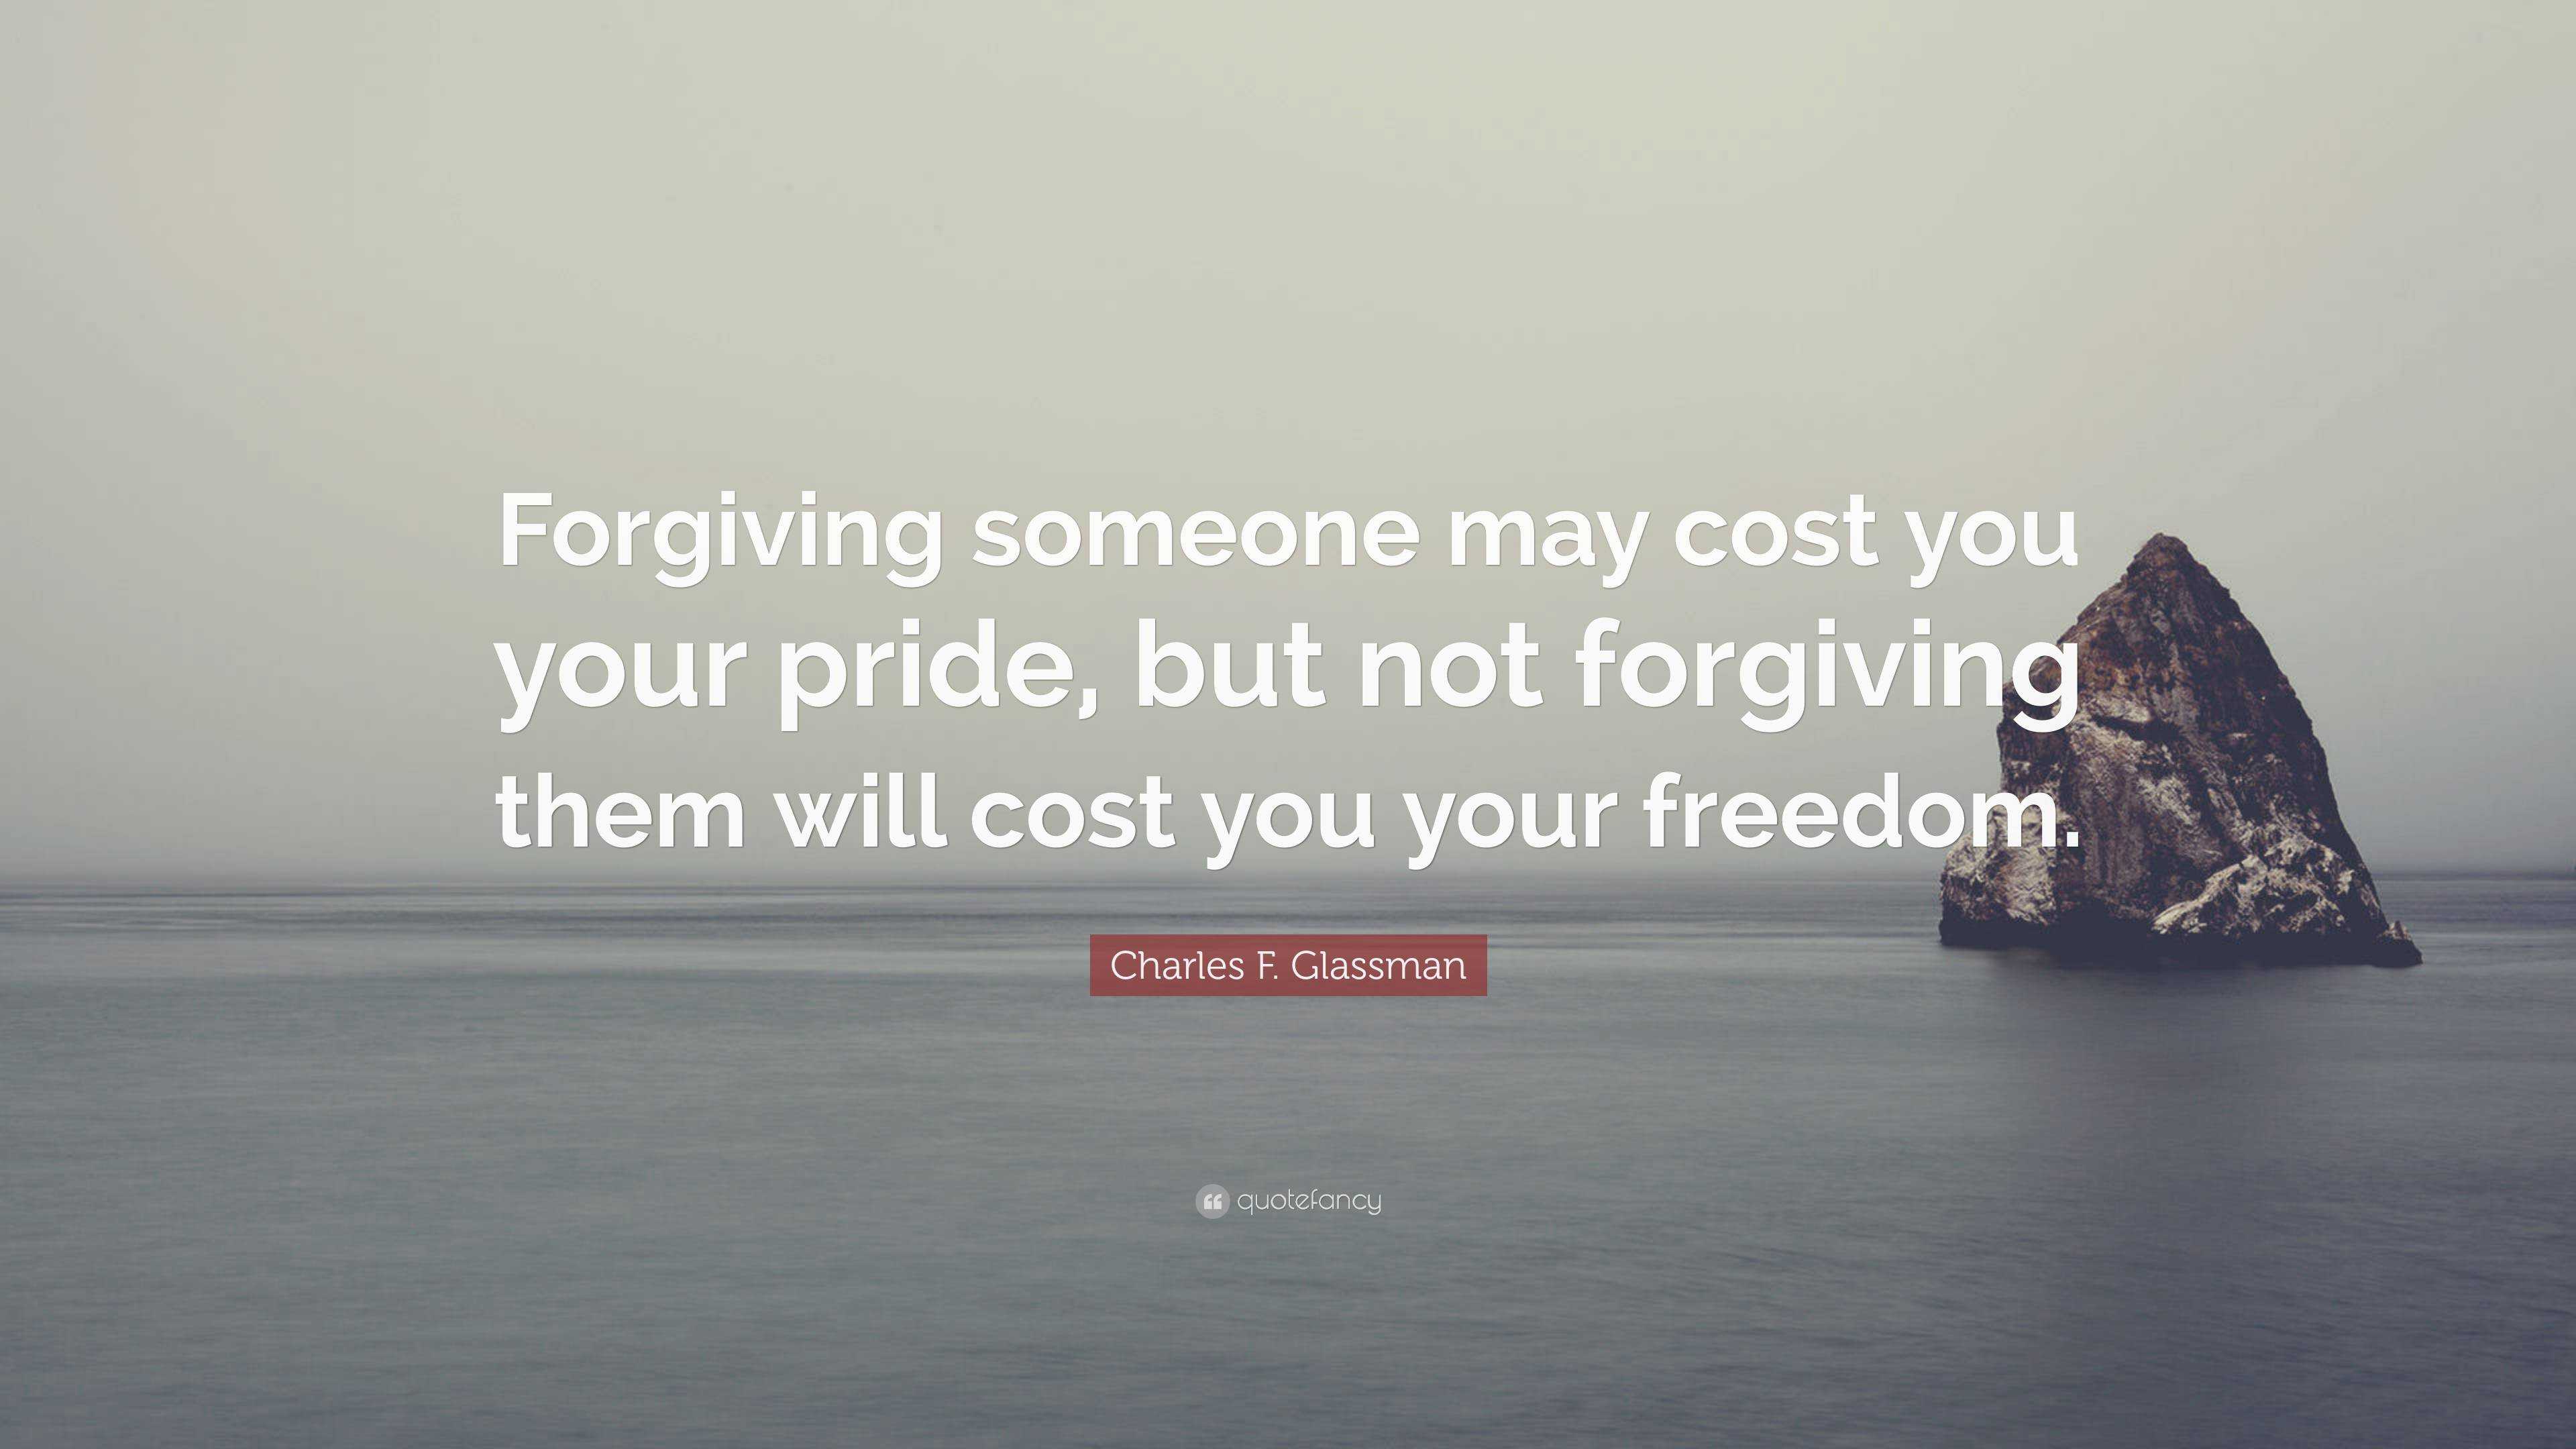 Charles F. Glassman Quote: “Forgiving someone doesn't mean